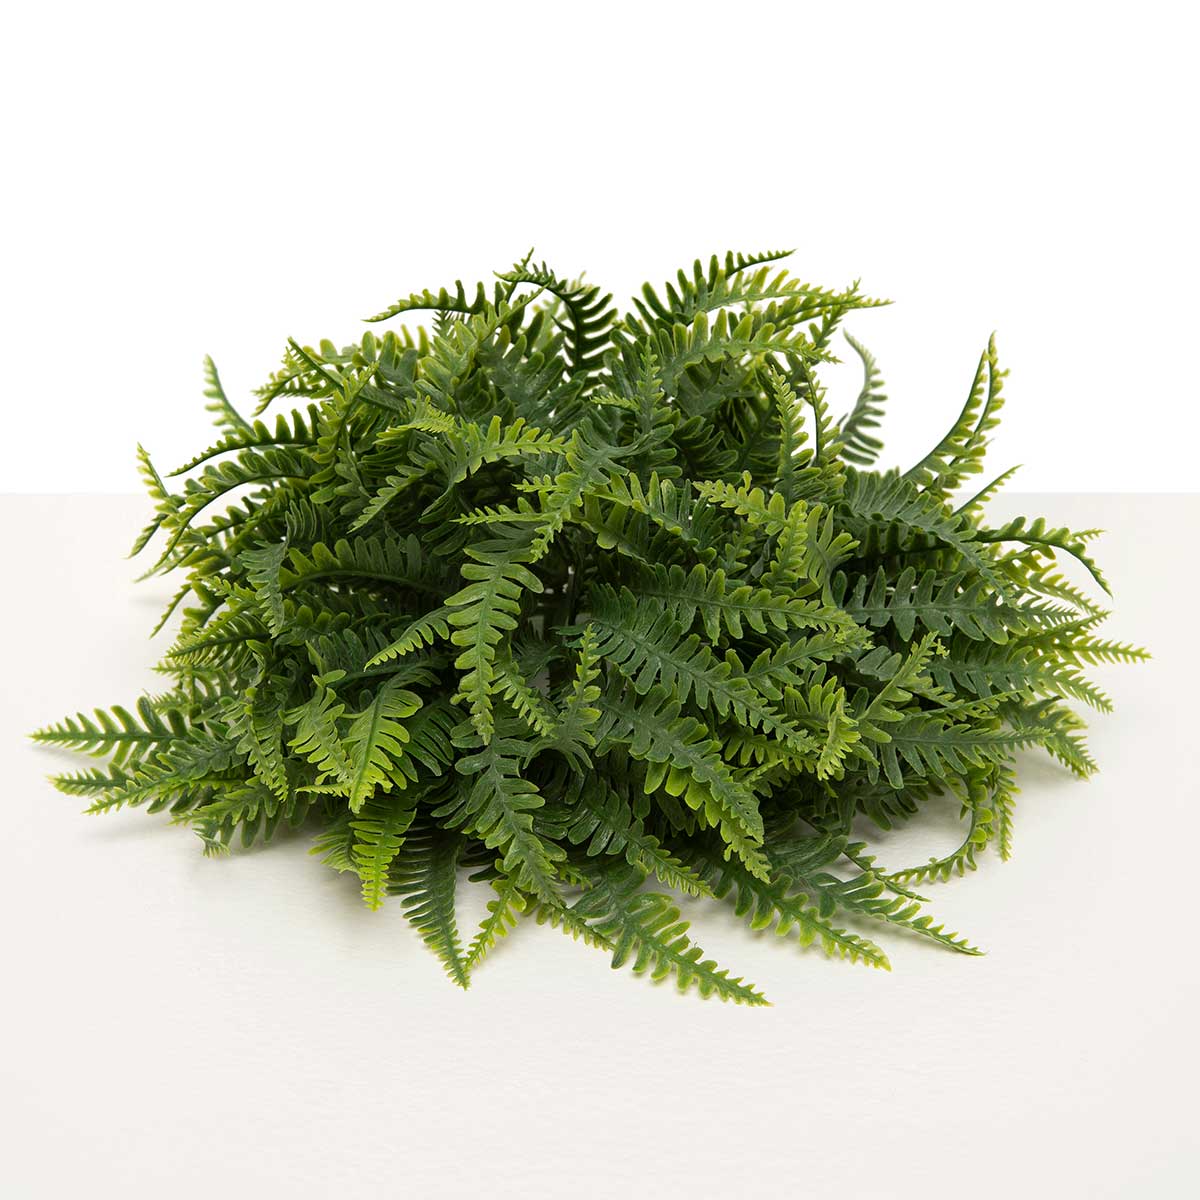 DOME RESURRECTION FERN 9IN X 3.5IN - Click Image to Close